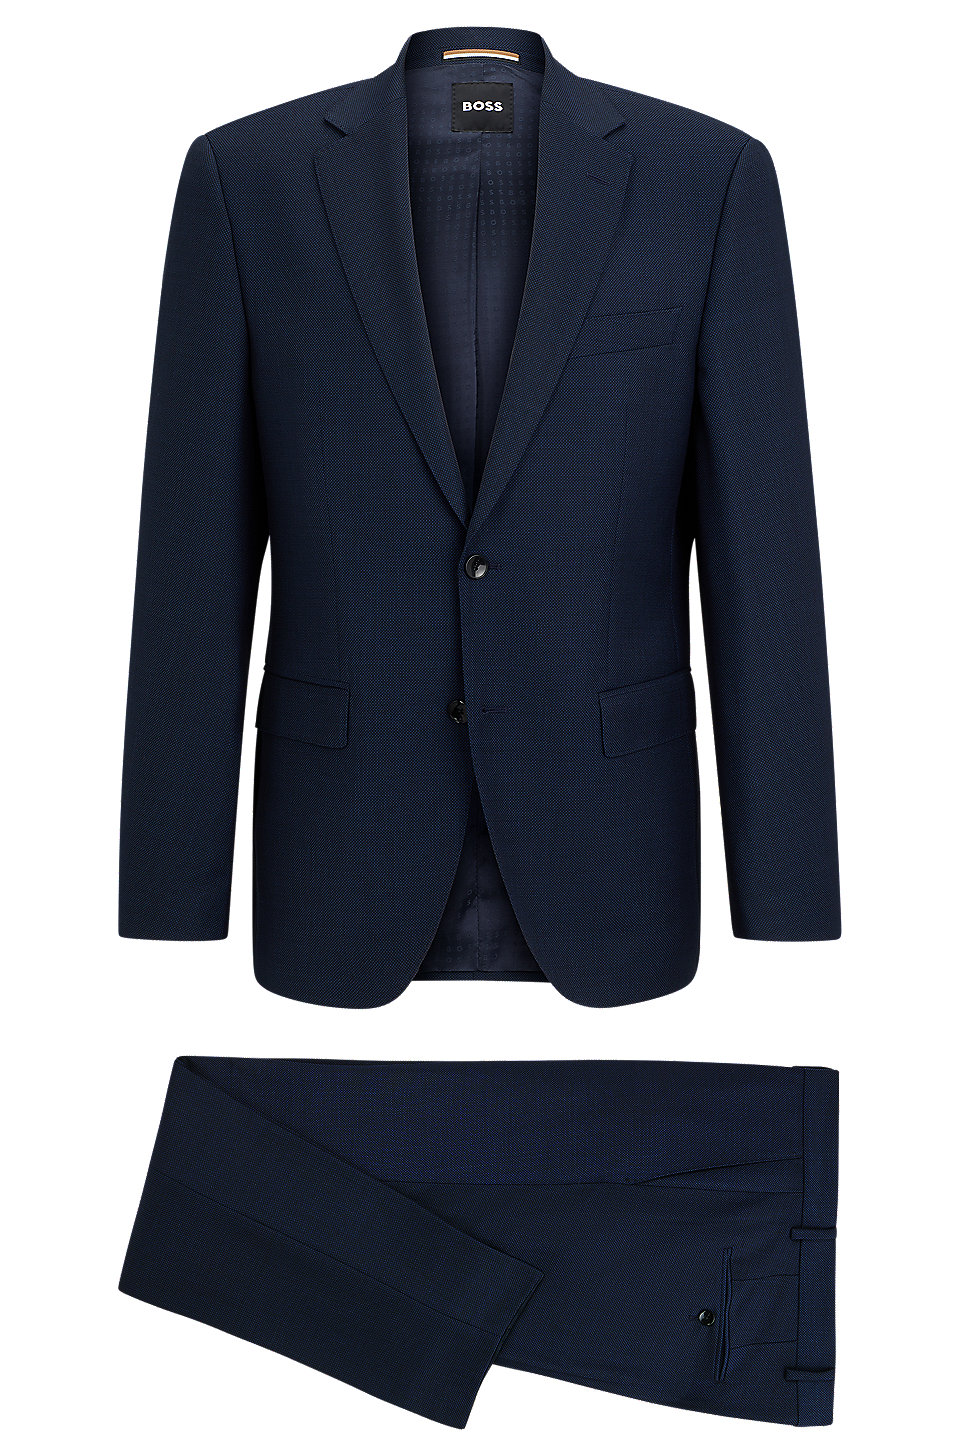 BOSS - Regular-fit suit in micro-patterned stretch cloth